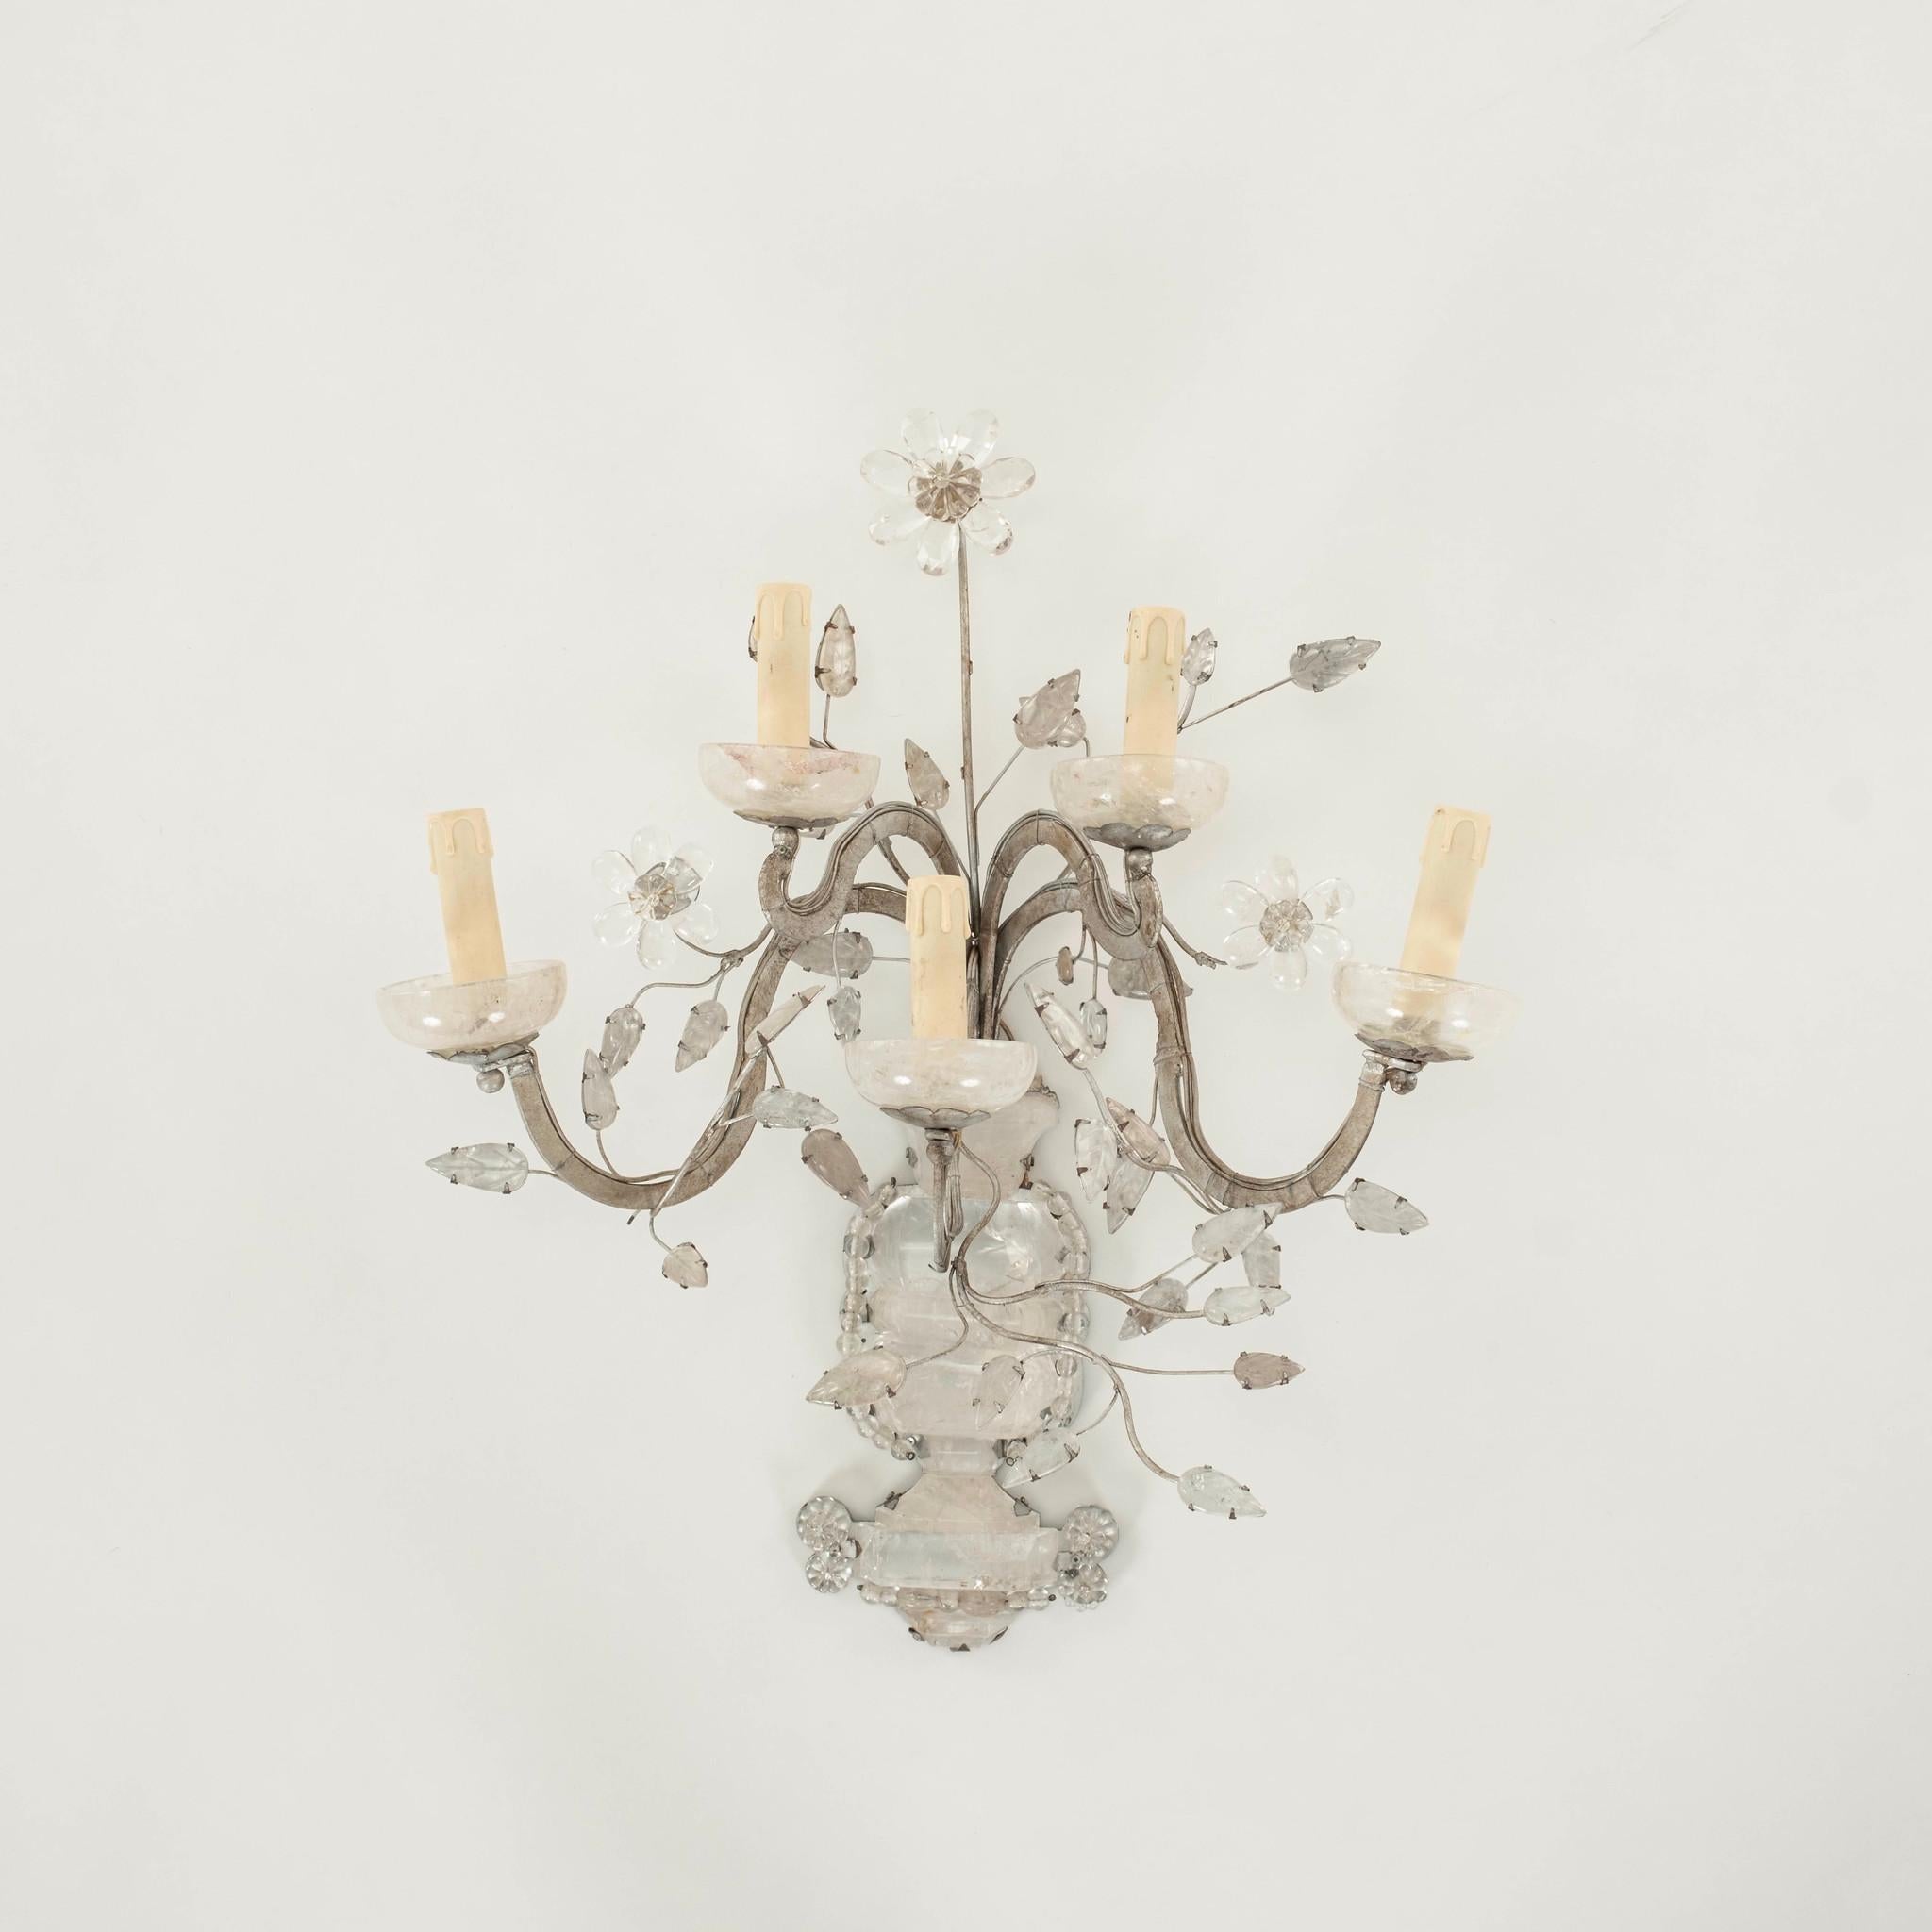 A 20th Century pair of Maison Baguès style five arm,  silver gilt candelabra shaped sconces featuring massive rock crystal bases and foliage adorned with crystal flowers.